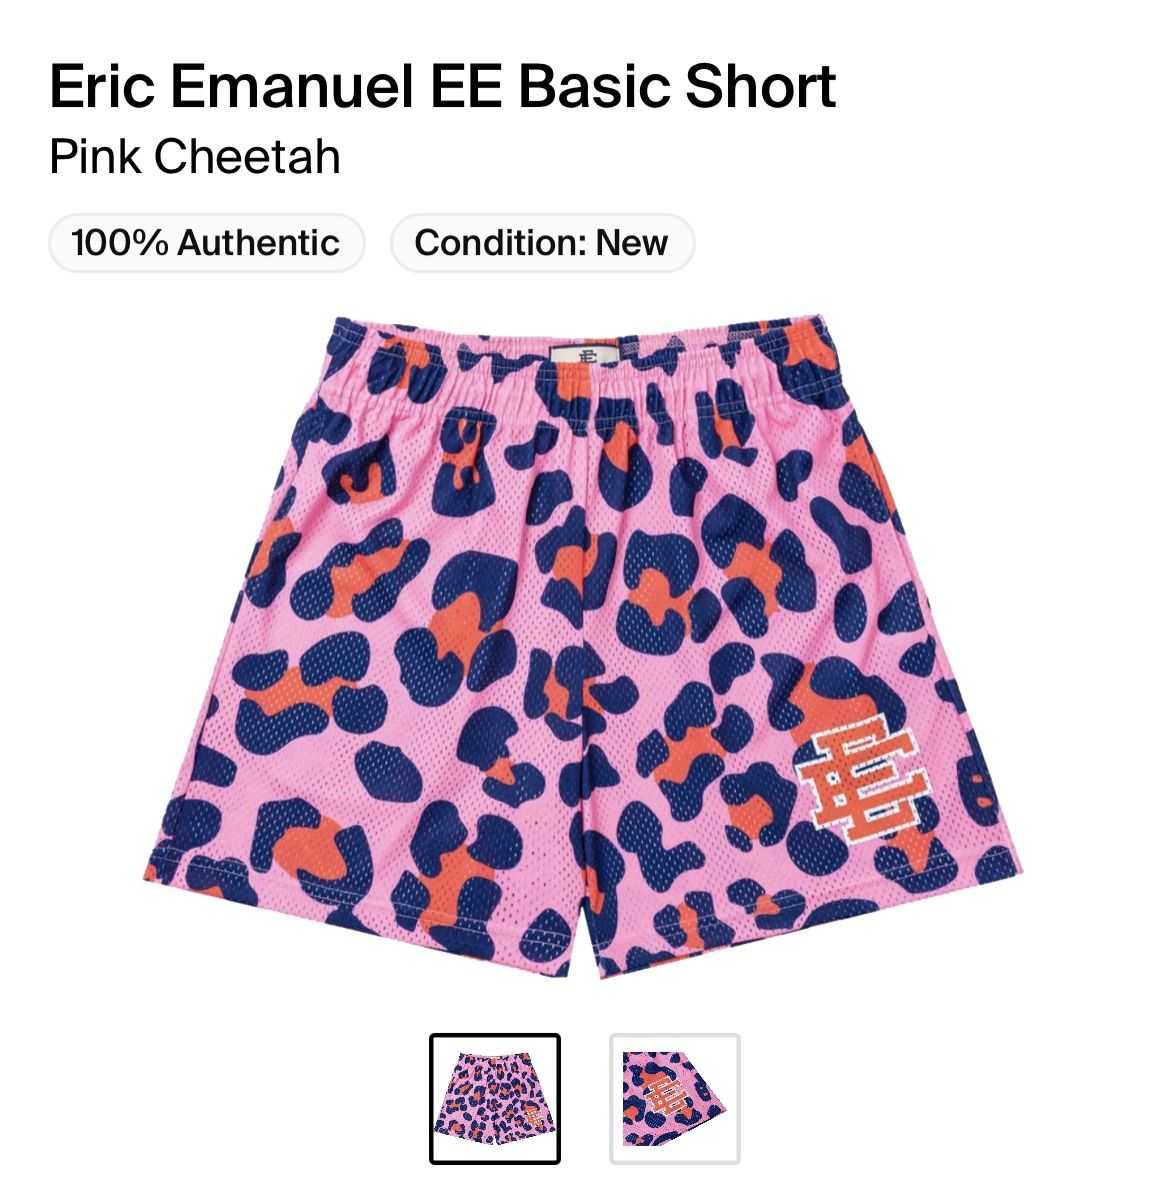 FOR SALE I KNOW ITS NOT EE SORRY :/ : r/EricEmanuel